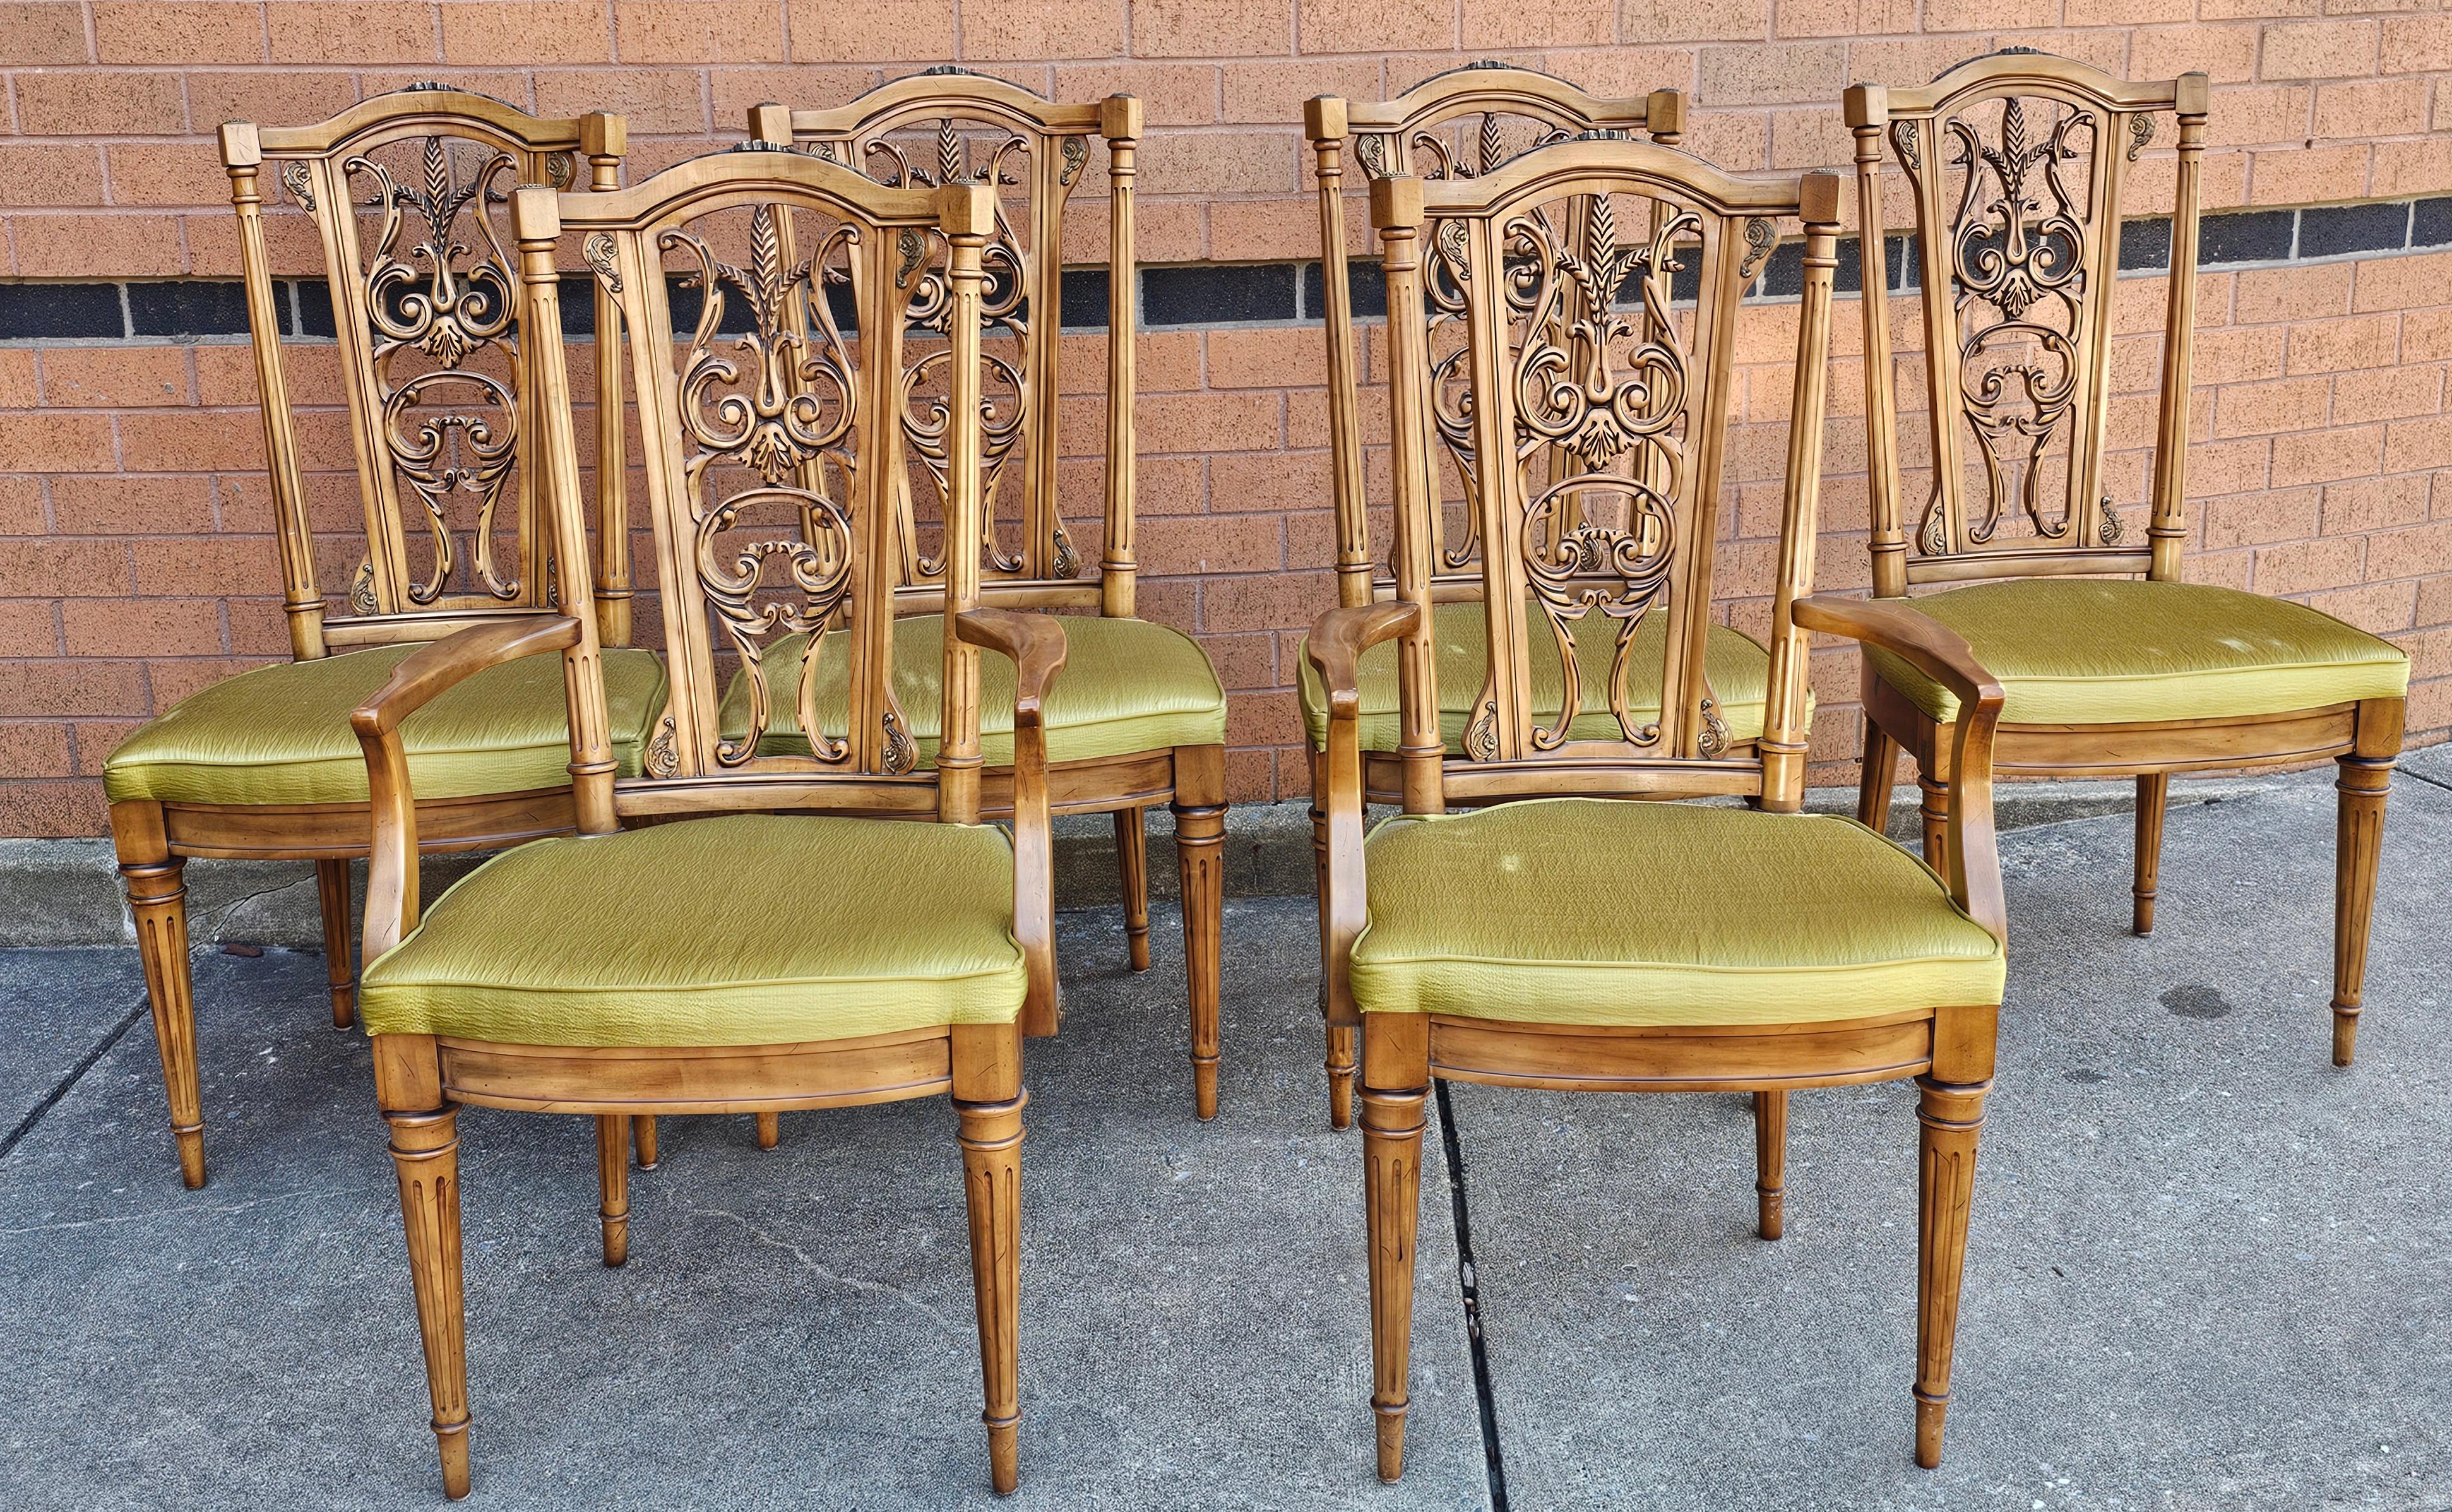 Set of six Louis XVI Style Brass Mounted French Walnut upholstered dining chairs. Four side chairs and two captain chairs. Measures 20.5